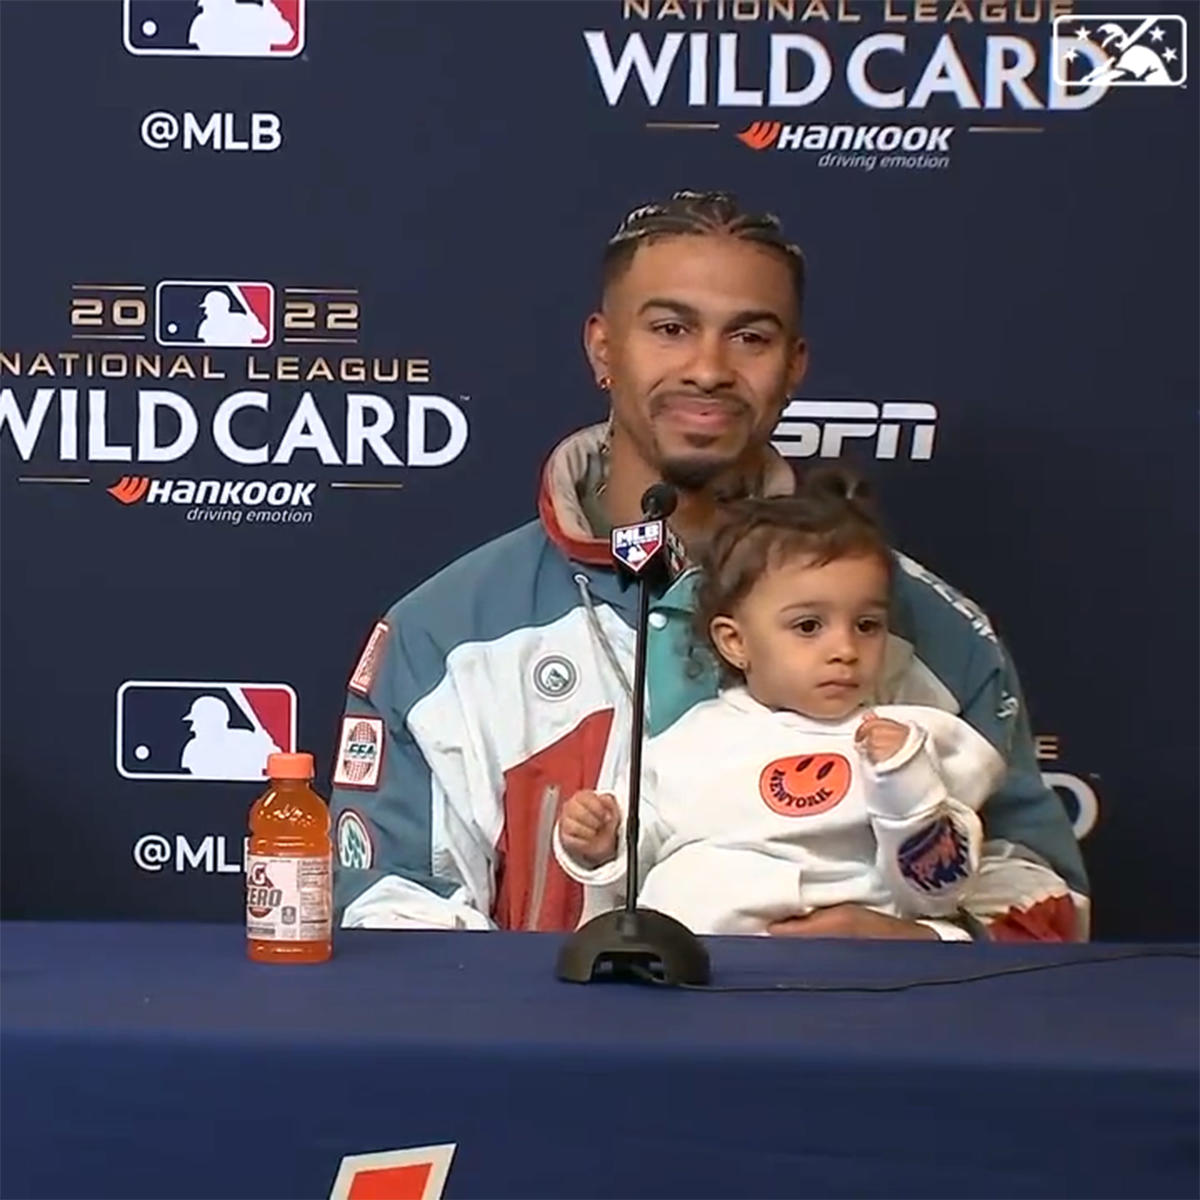 Francisco Lindor gets welcome day off after wife Katia gives birth